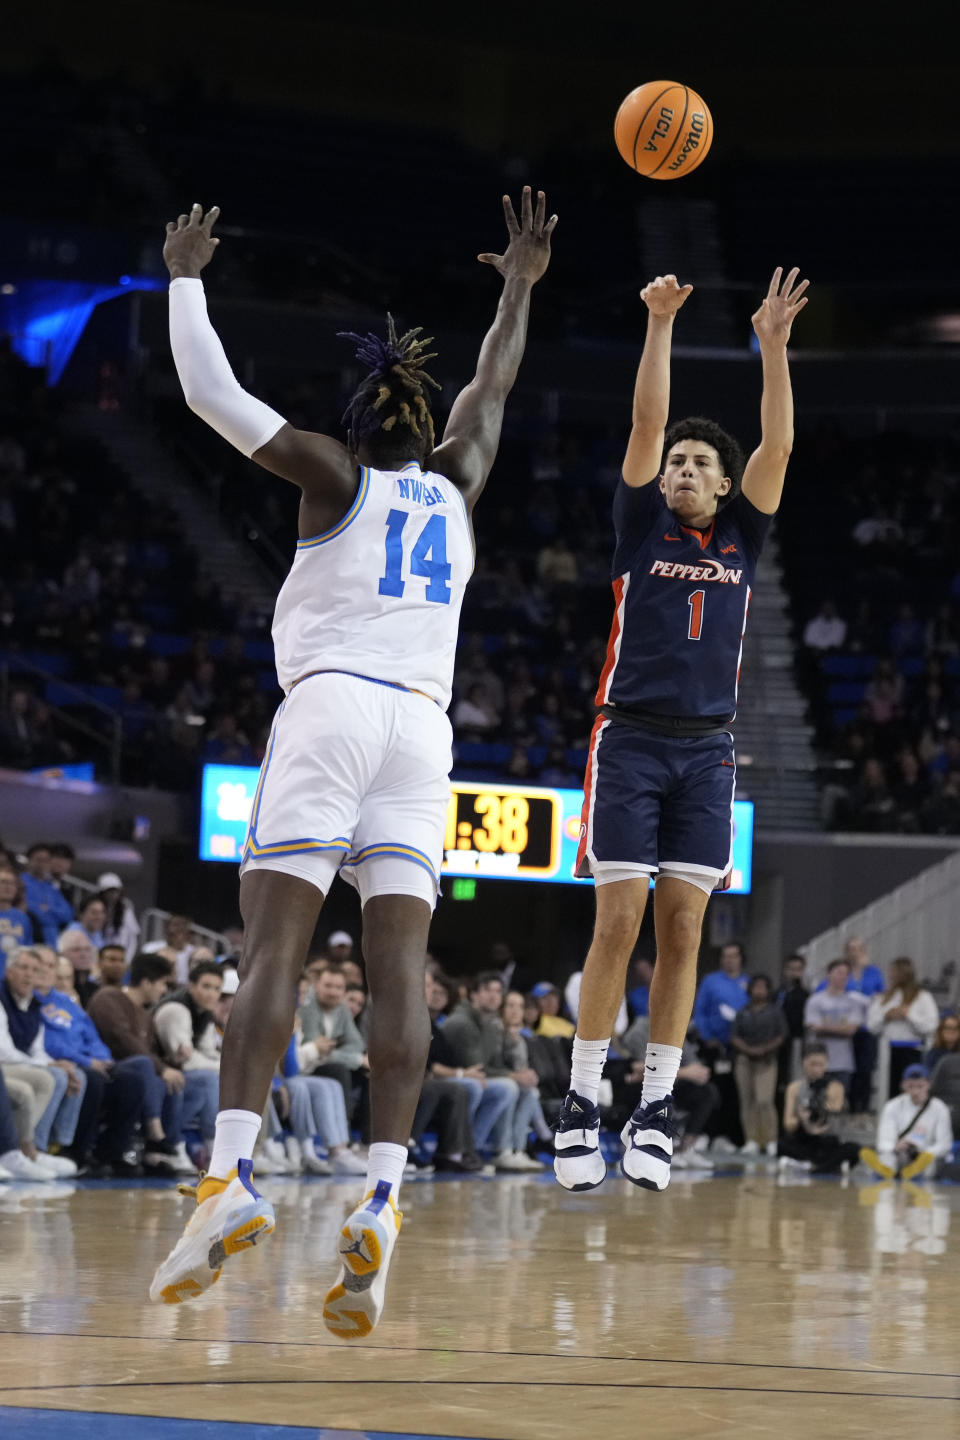 Pepperdine guard Mike Mitchell Jr. (1) shoots over UCLA forward Kenneth Nwuba (14) during the first half of an NCAA college basketball game Wednesday, Nov. 23, 2022, in Los Angeles. (AP Photo/Marcio Jose Sanchez)